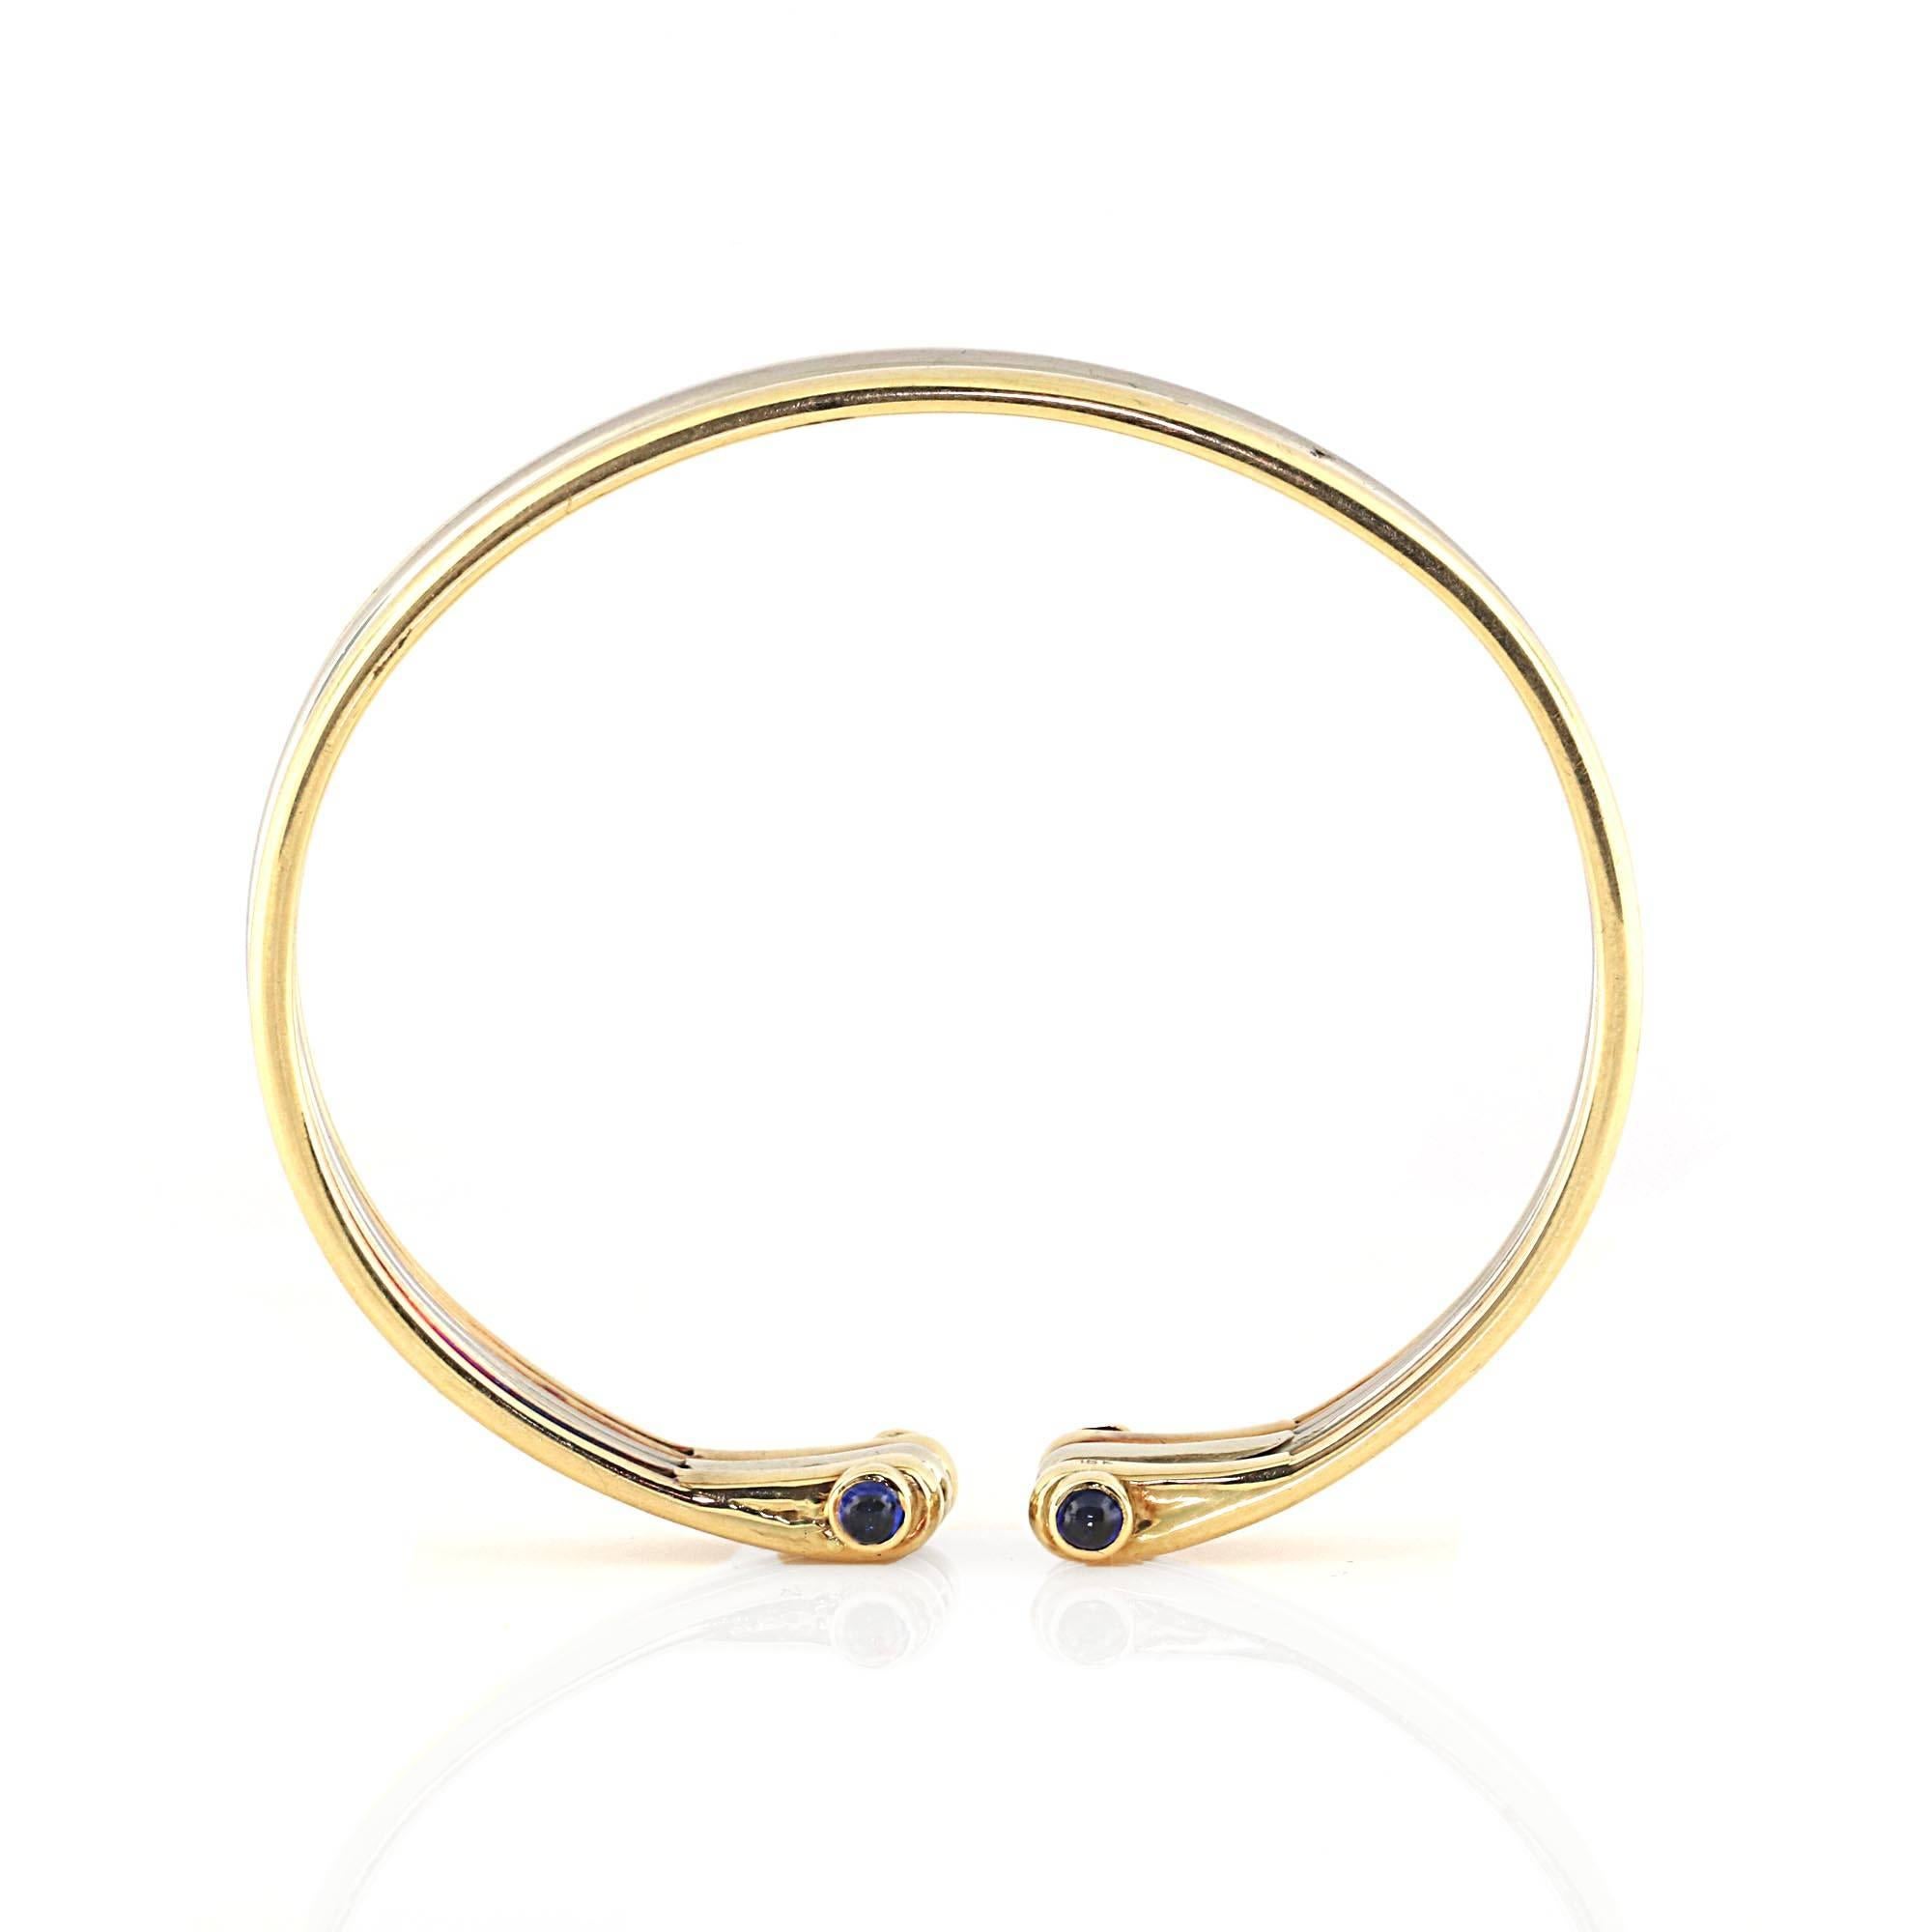 Truly a classic bracelet. A white gold band wrapped between two yellow gold bands. Each side of the bracelet contains 2 cabochon (rounded) sapphires white are bezel set. The bracelet has an opening in the center for easy placement on the wrist.